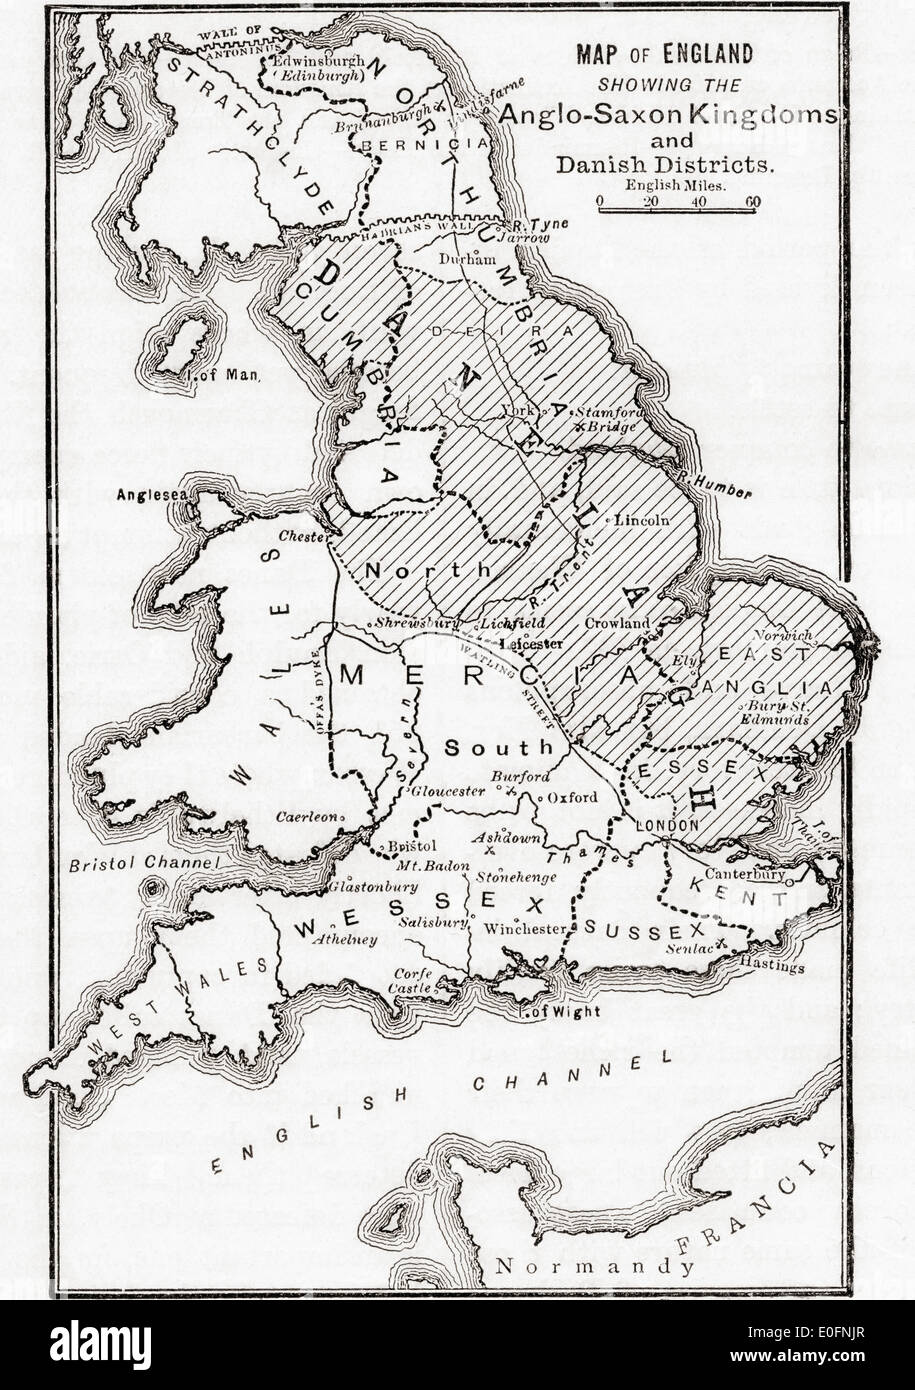 Map of England showing the Anglo-Saxon kingdoms and Danish districts in the first century. Stock Photo